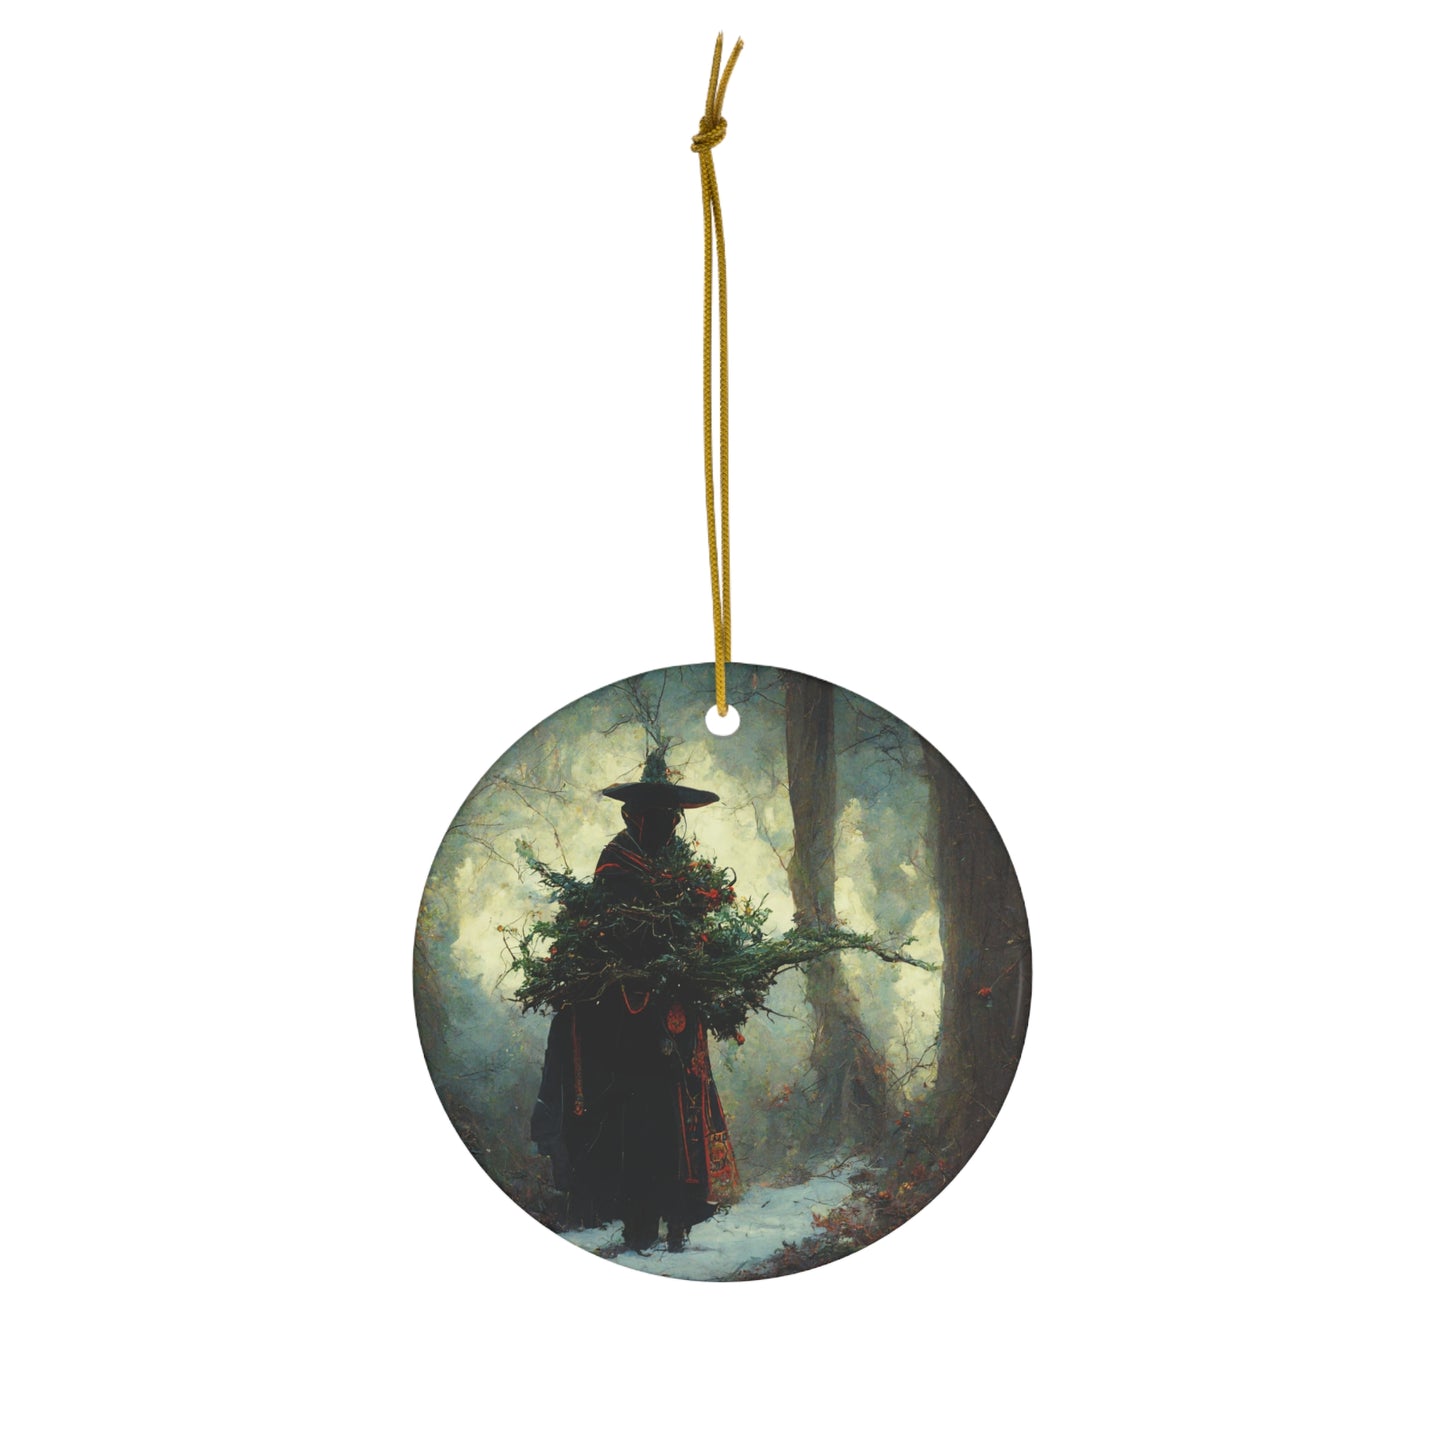 Ceramic Pagan Yule Ornament - Masculine Witch in the winter woods of yule - Blessed Yule! Round Circle ornament for Yule Tree